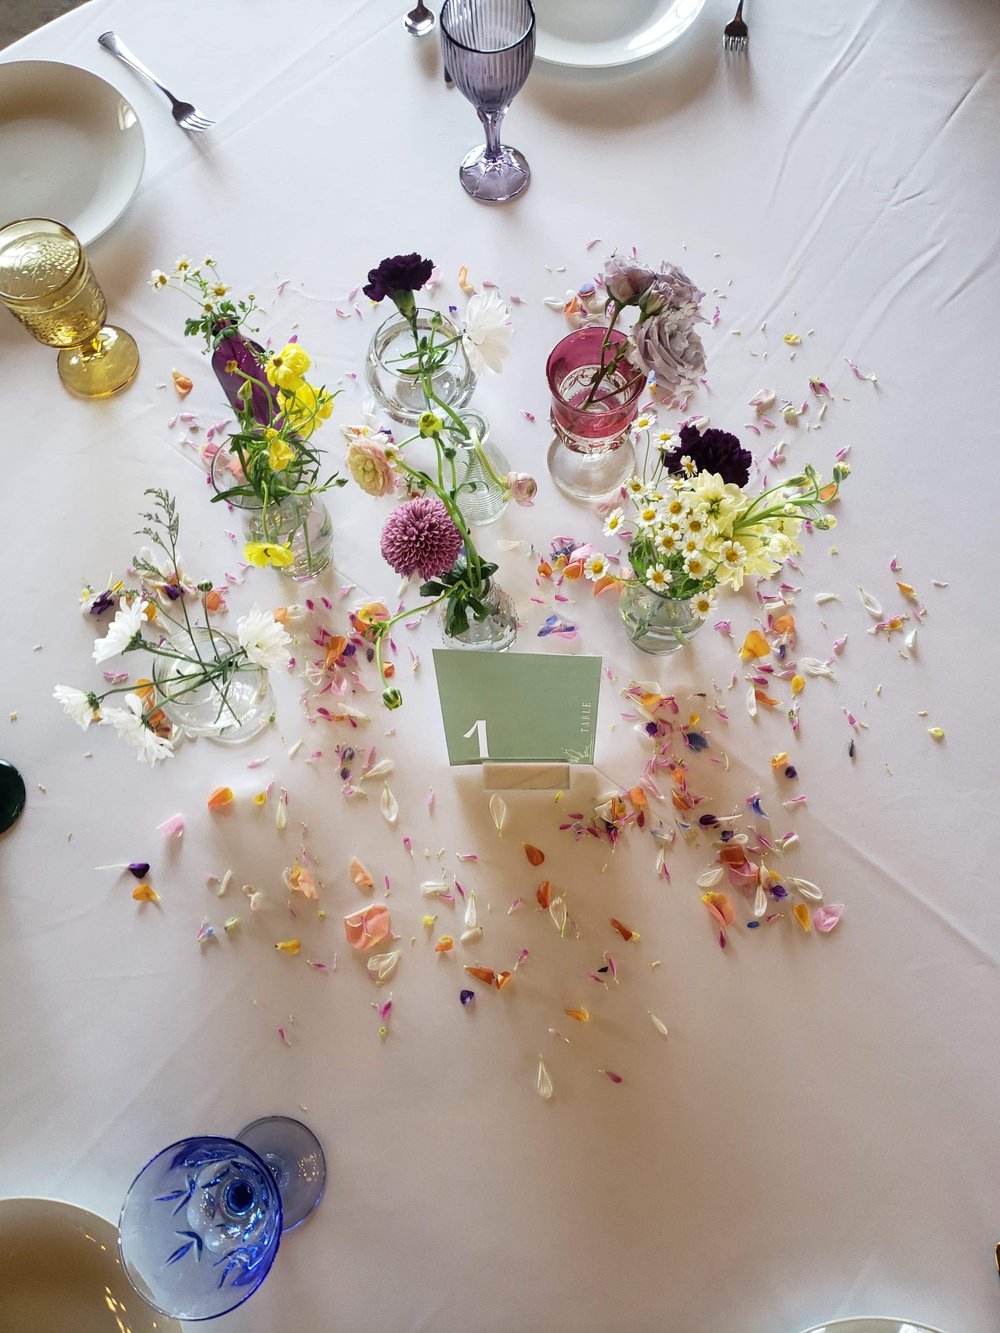 Floral confetti with single stem flowers